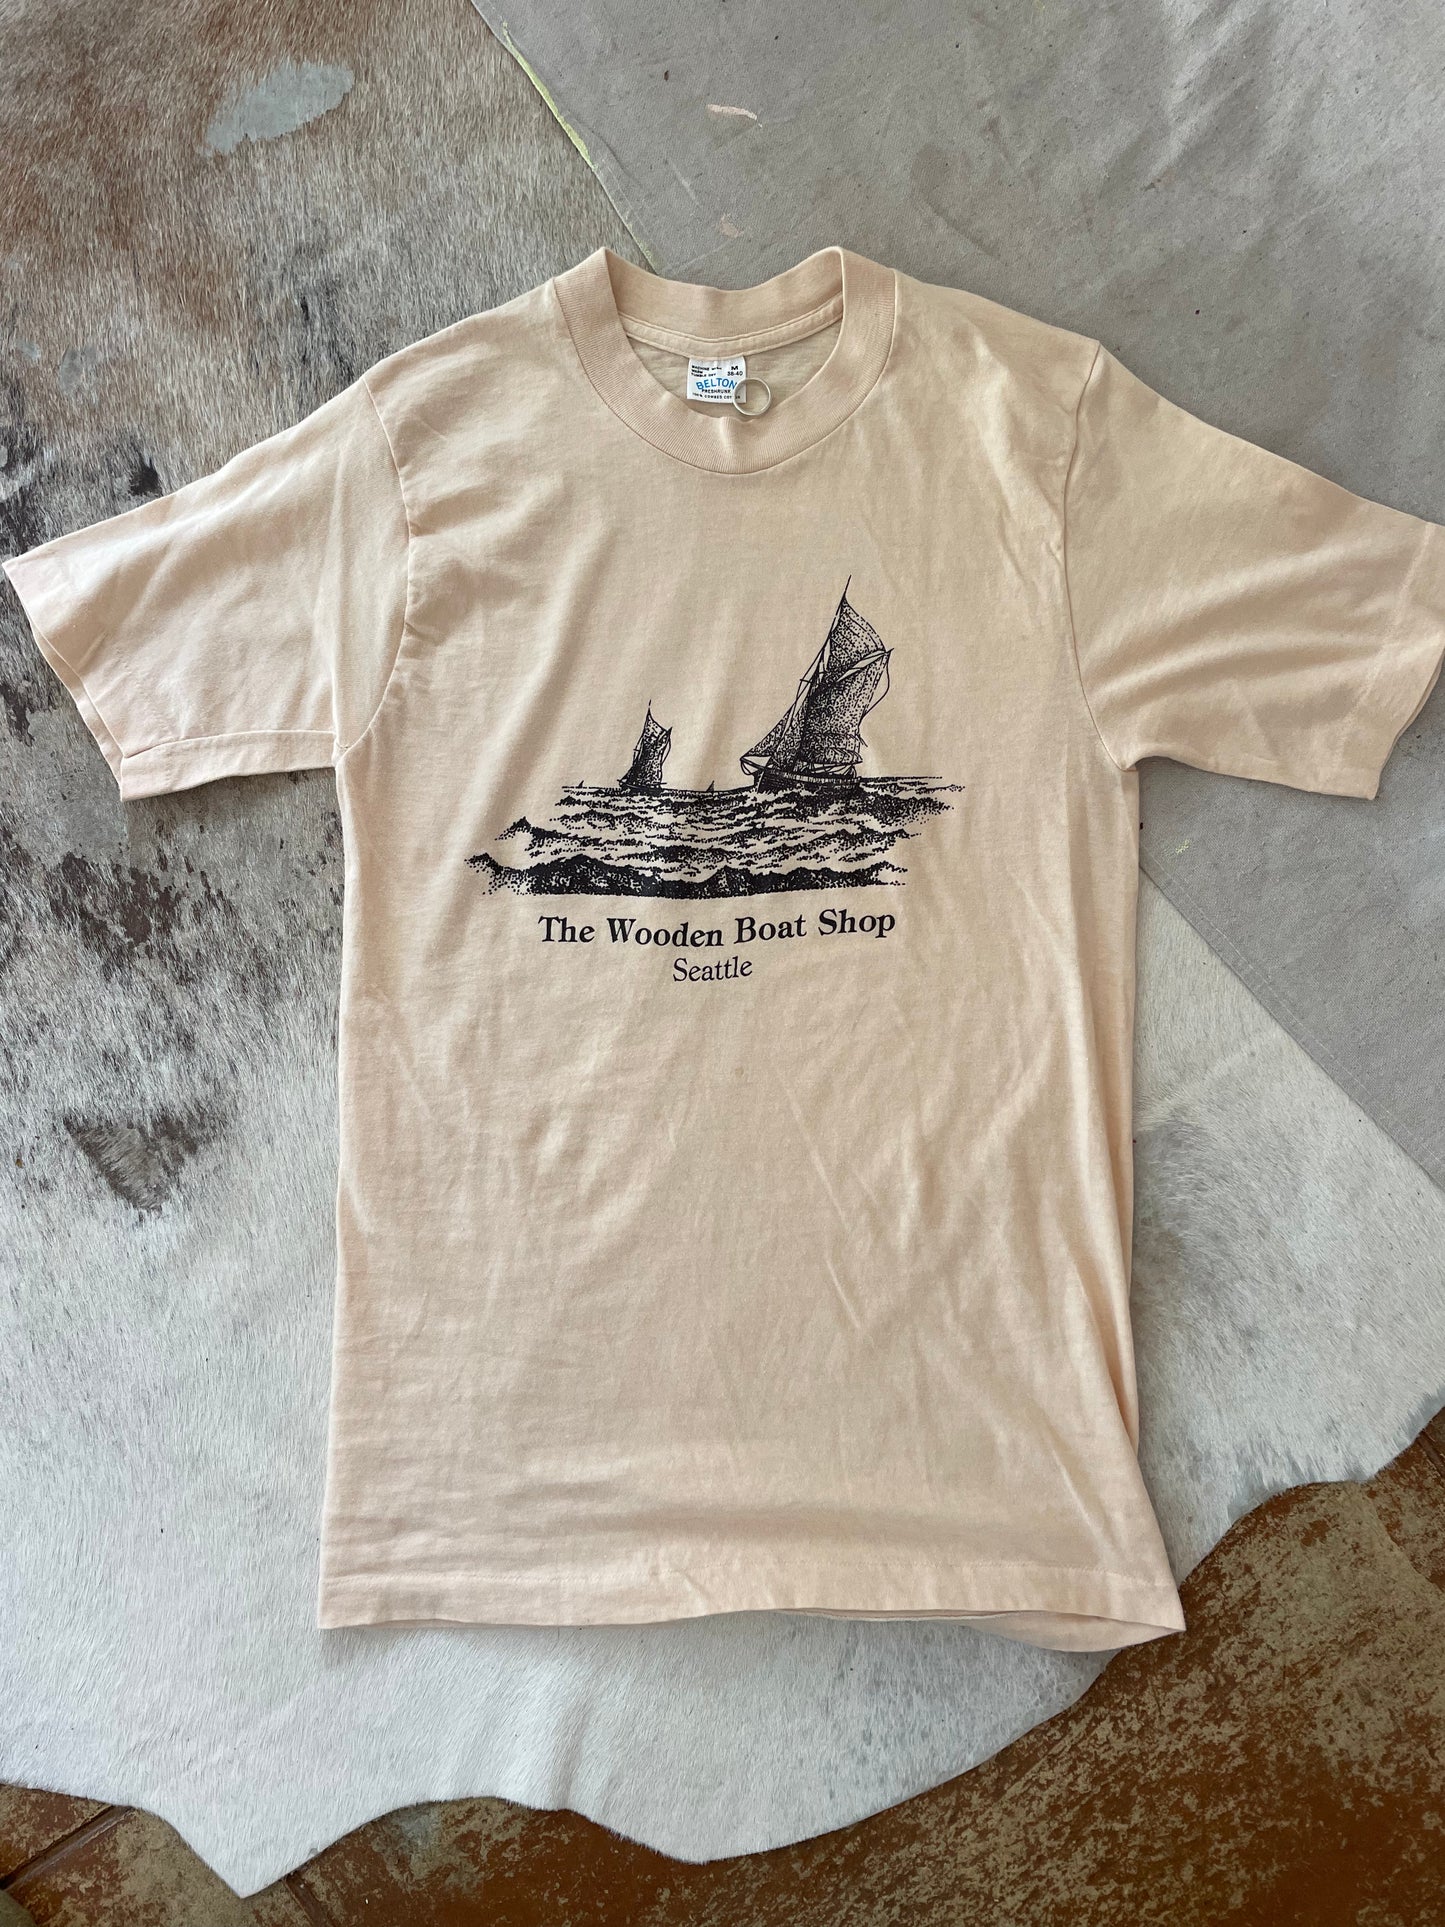 70s The Wooden Boat Shop, Seattle Tee